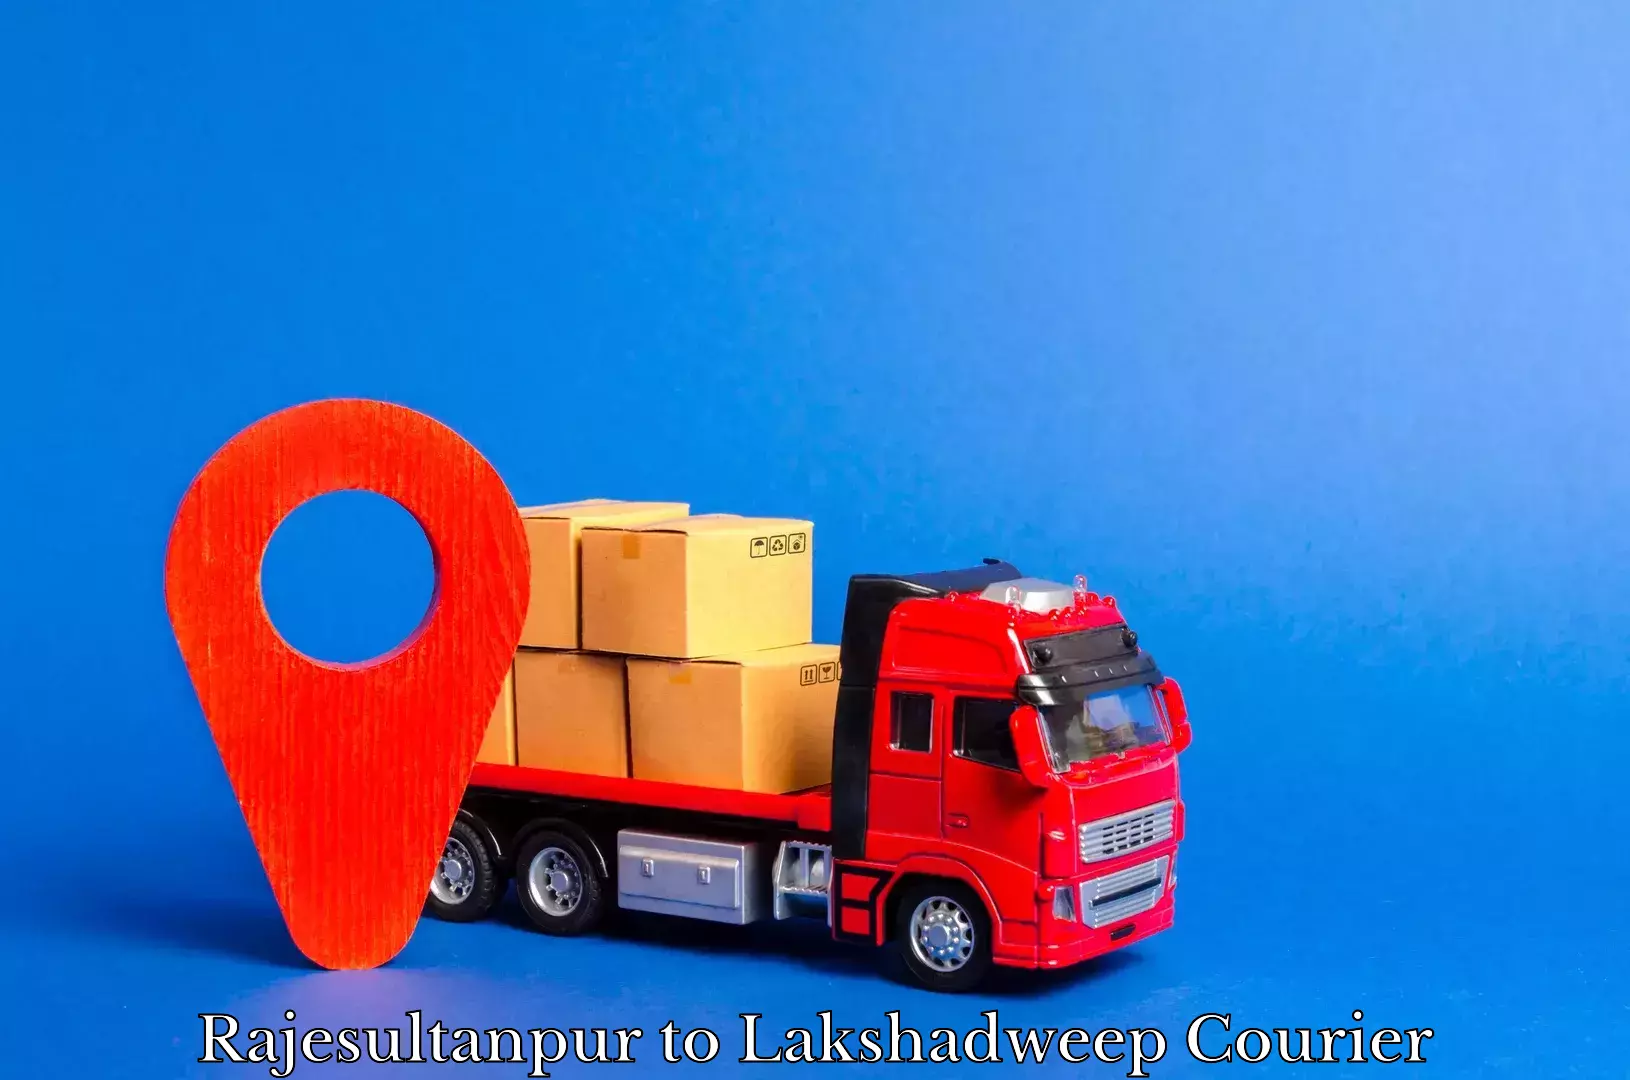 Fast shipping solutions Rajesultanpur to Lakshadweep